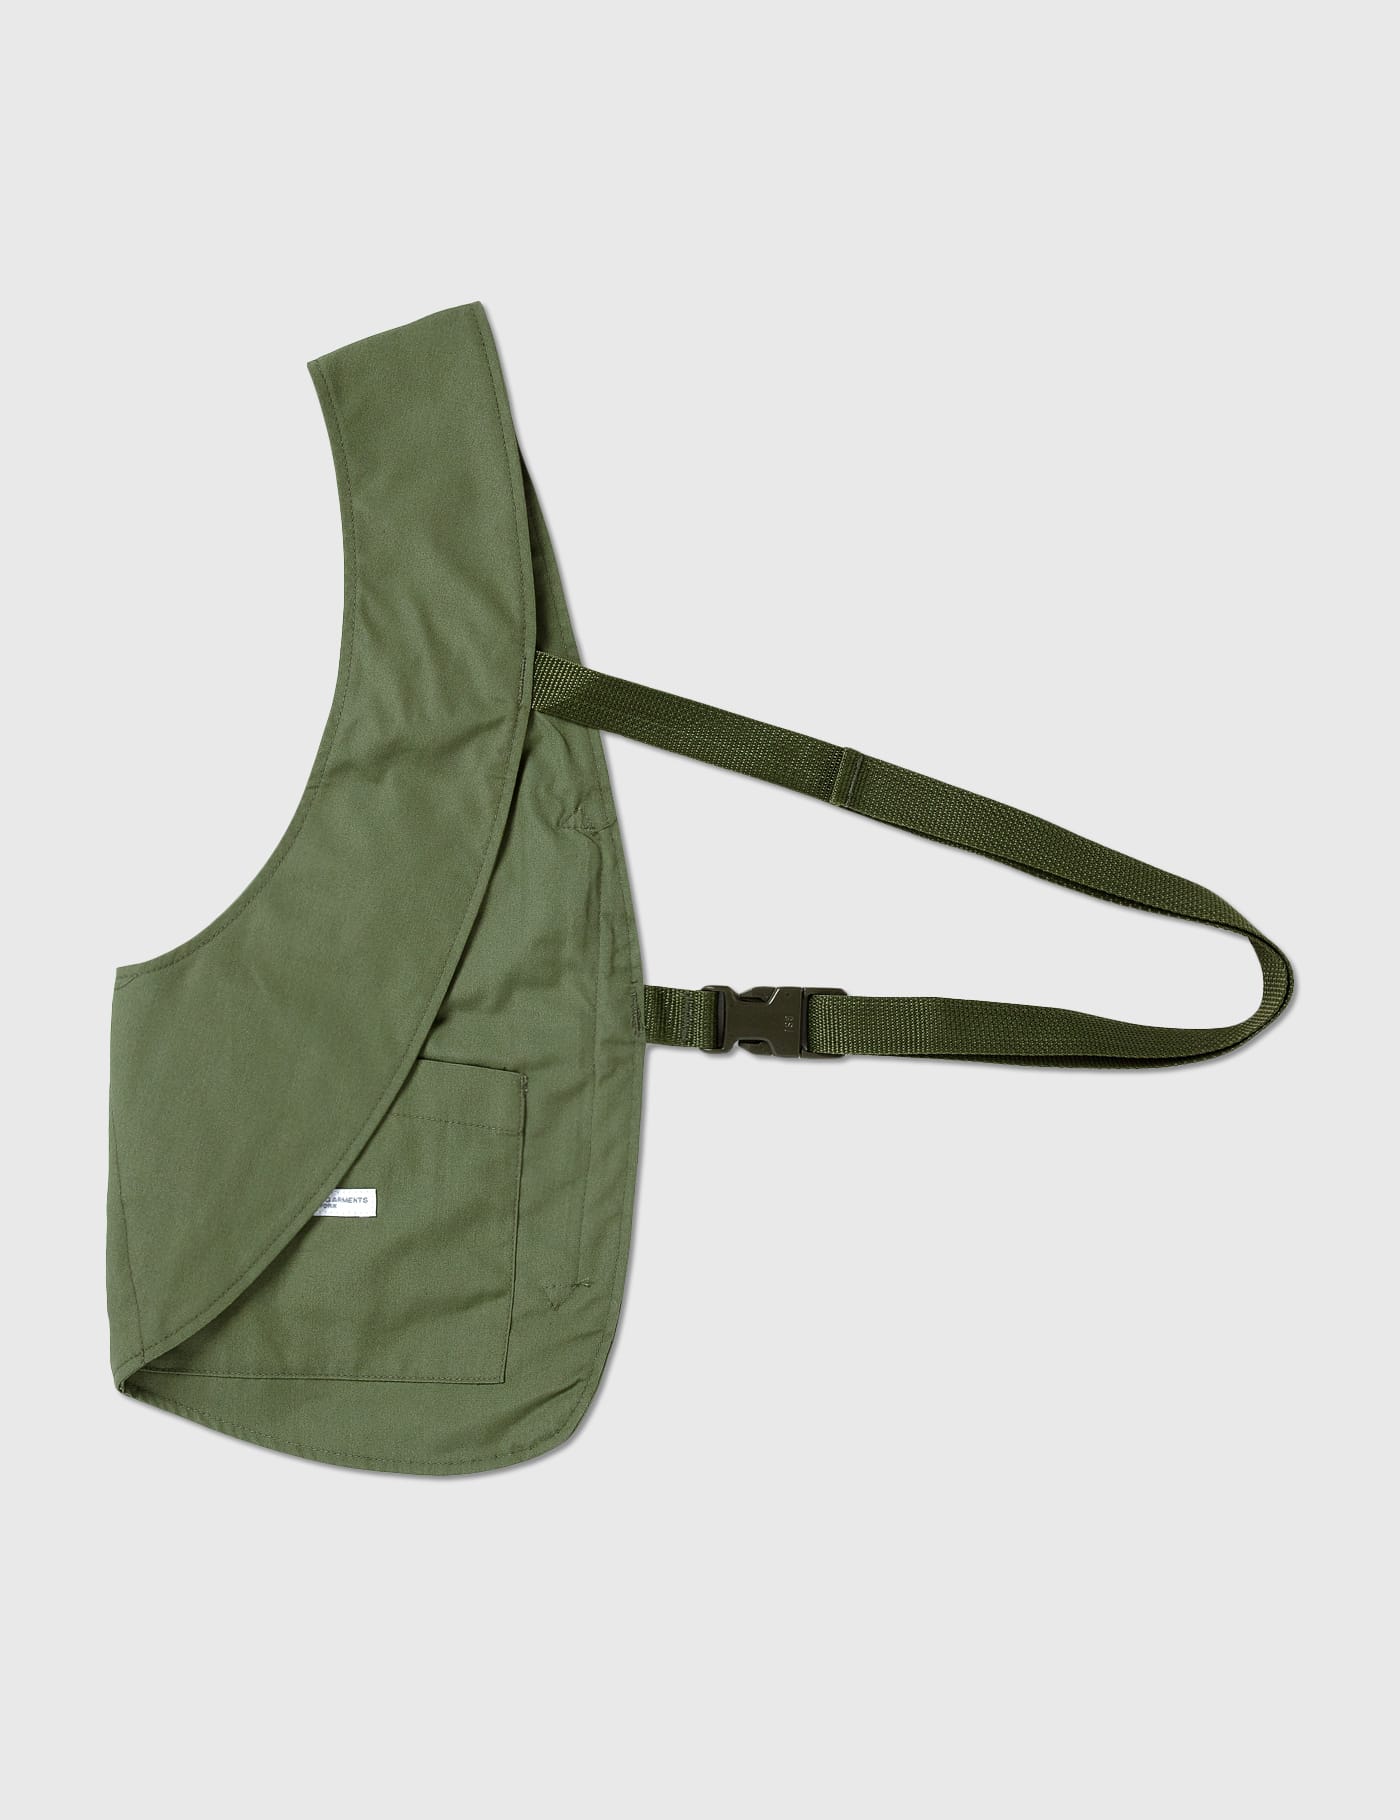 Engineered Garments - Shoulder Vest | HBX - Globally Curated 